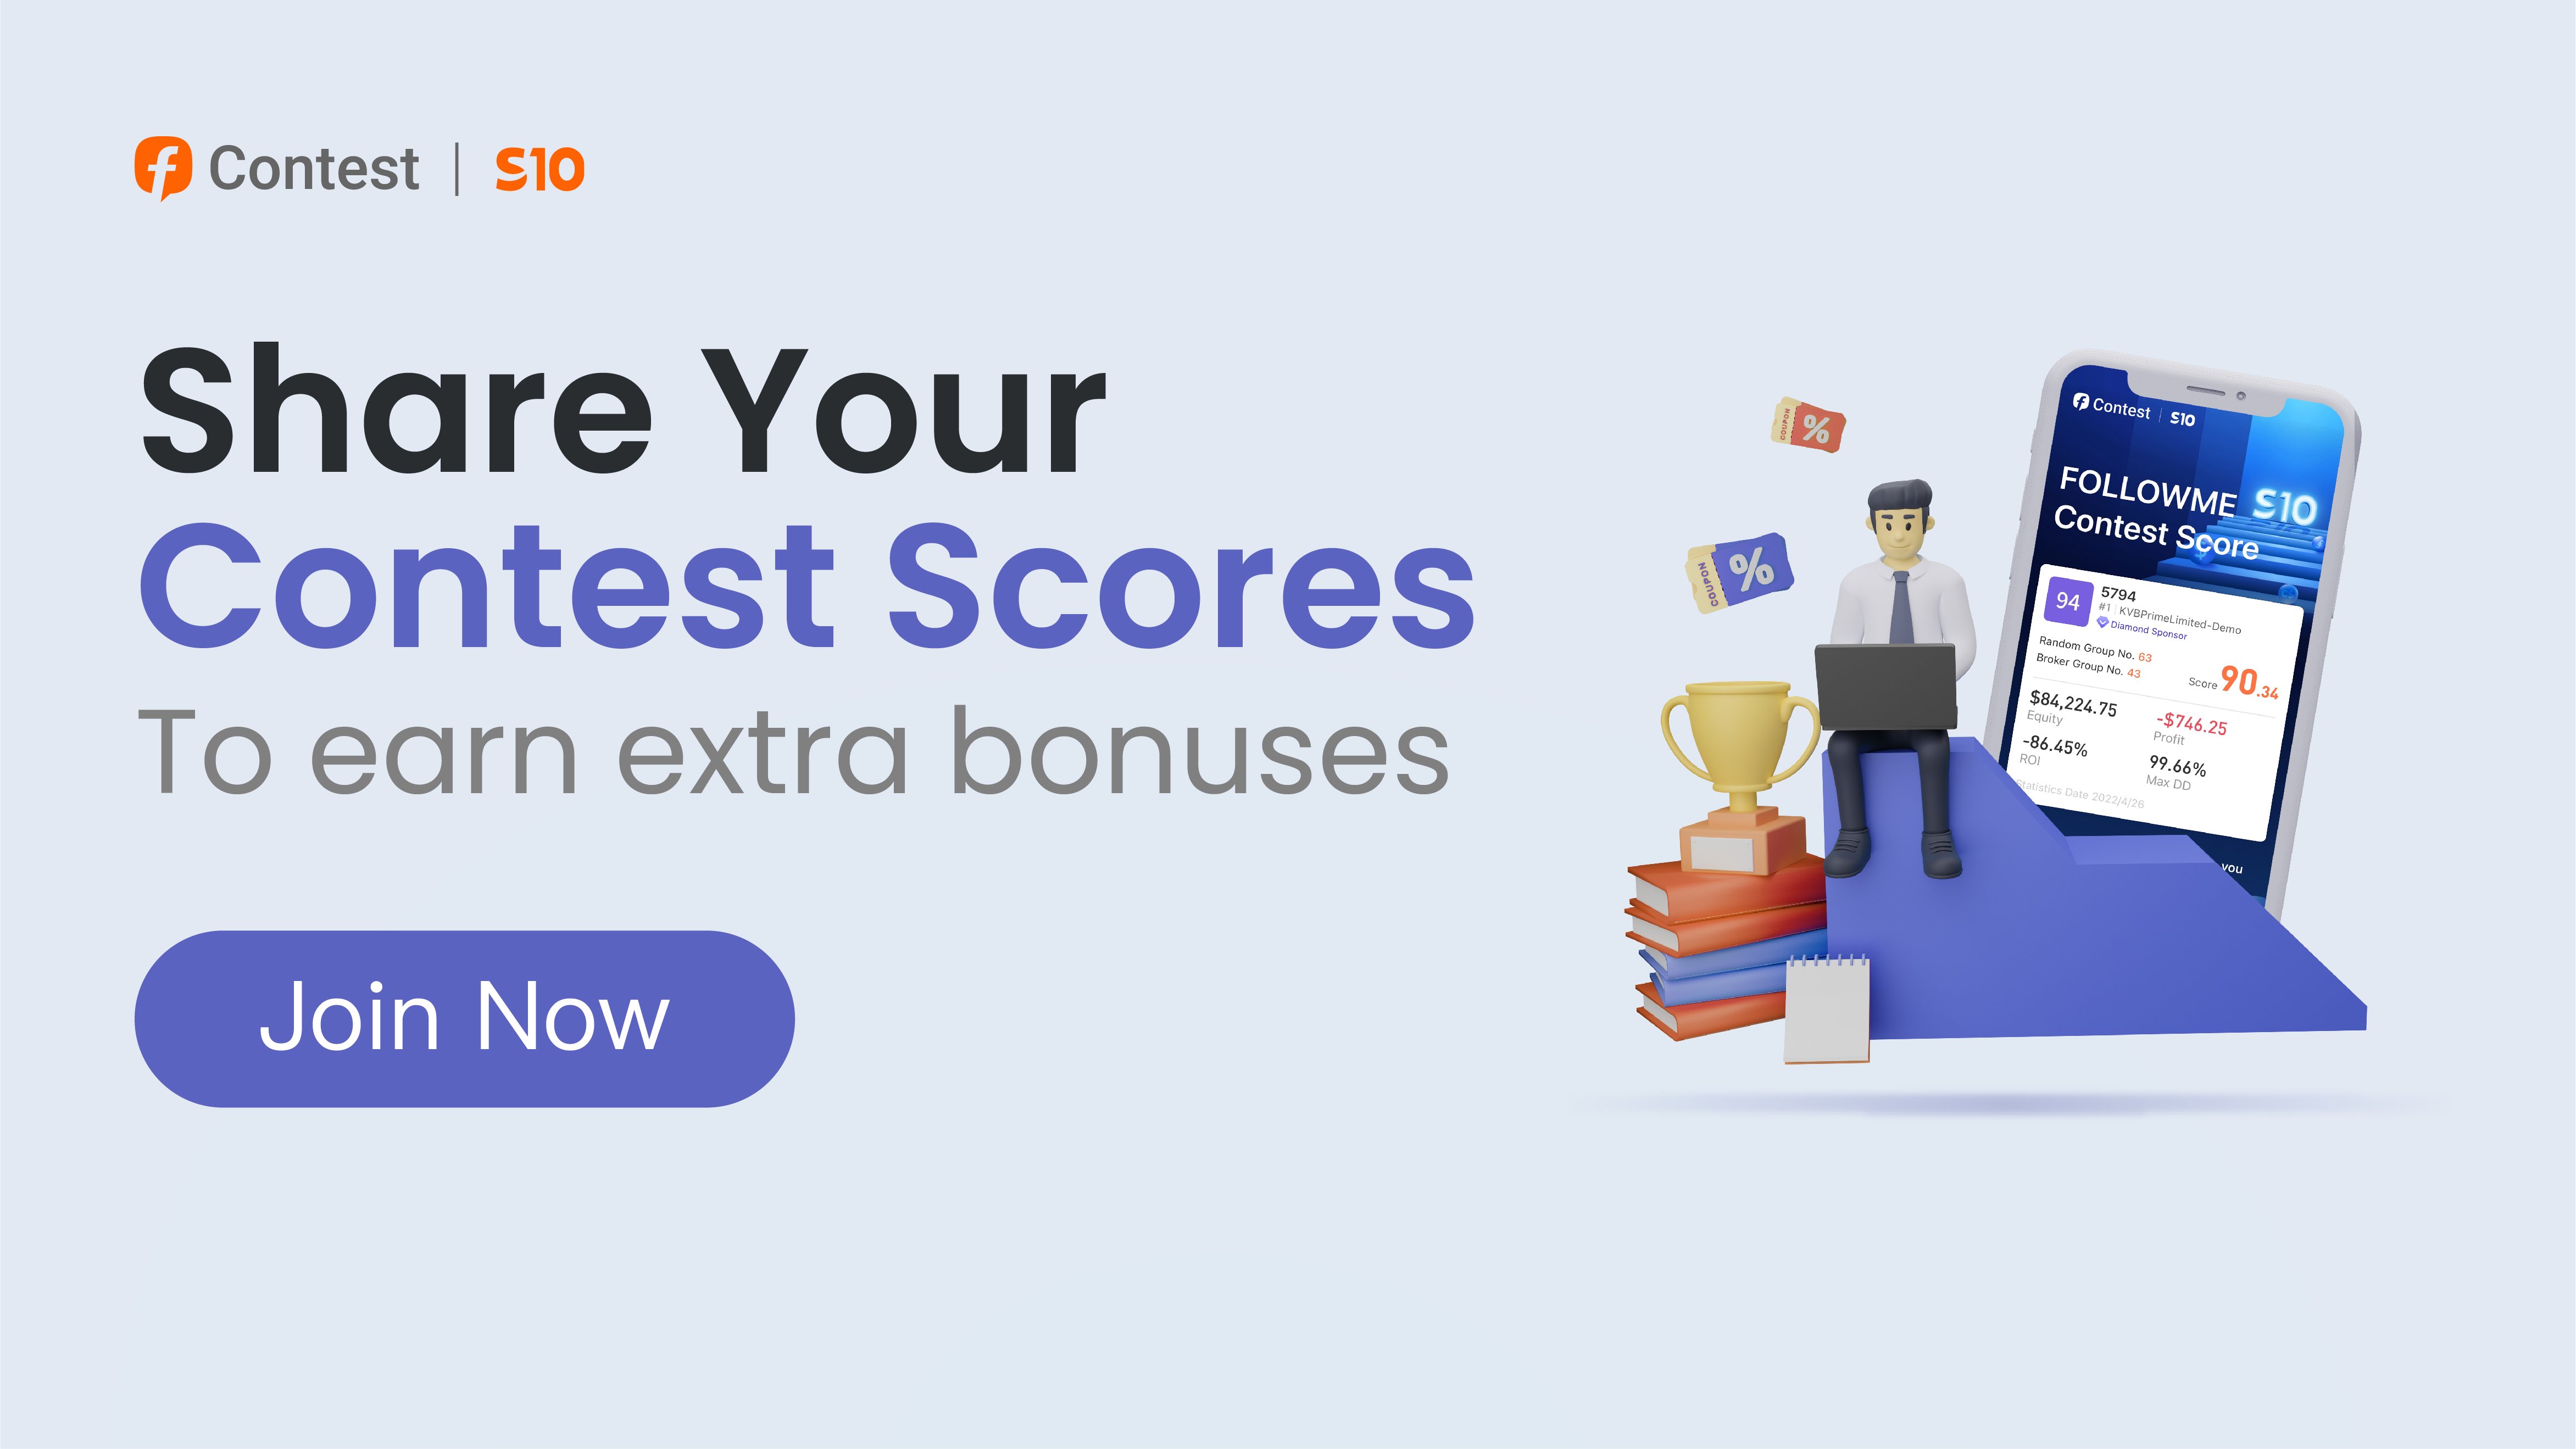 Share your contest scores and get extra bonuses!